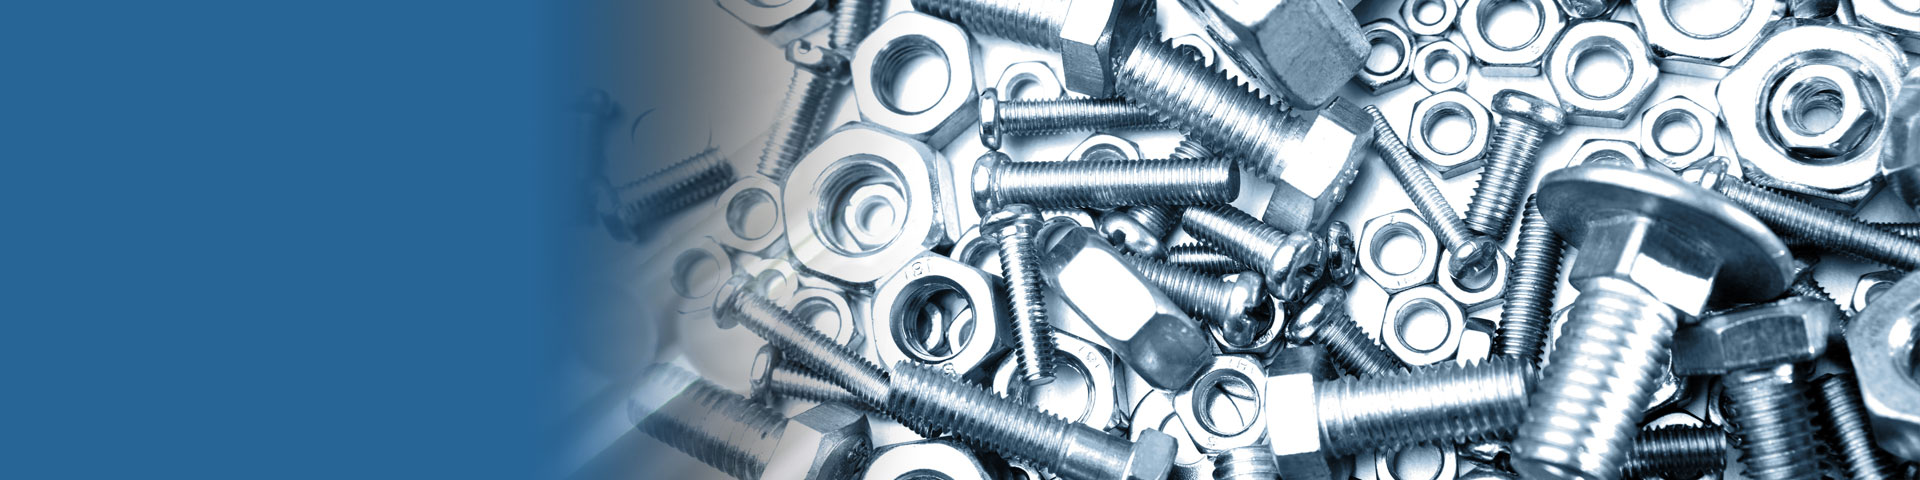 310S Stainless Steel Fasteners